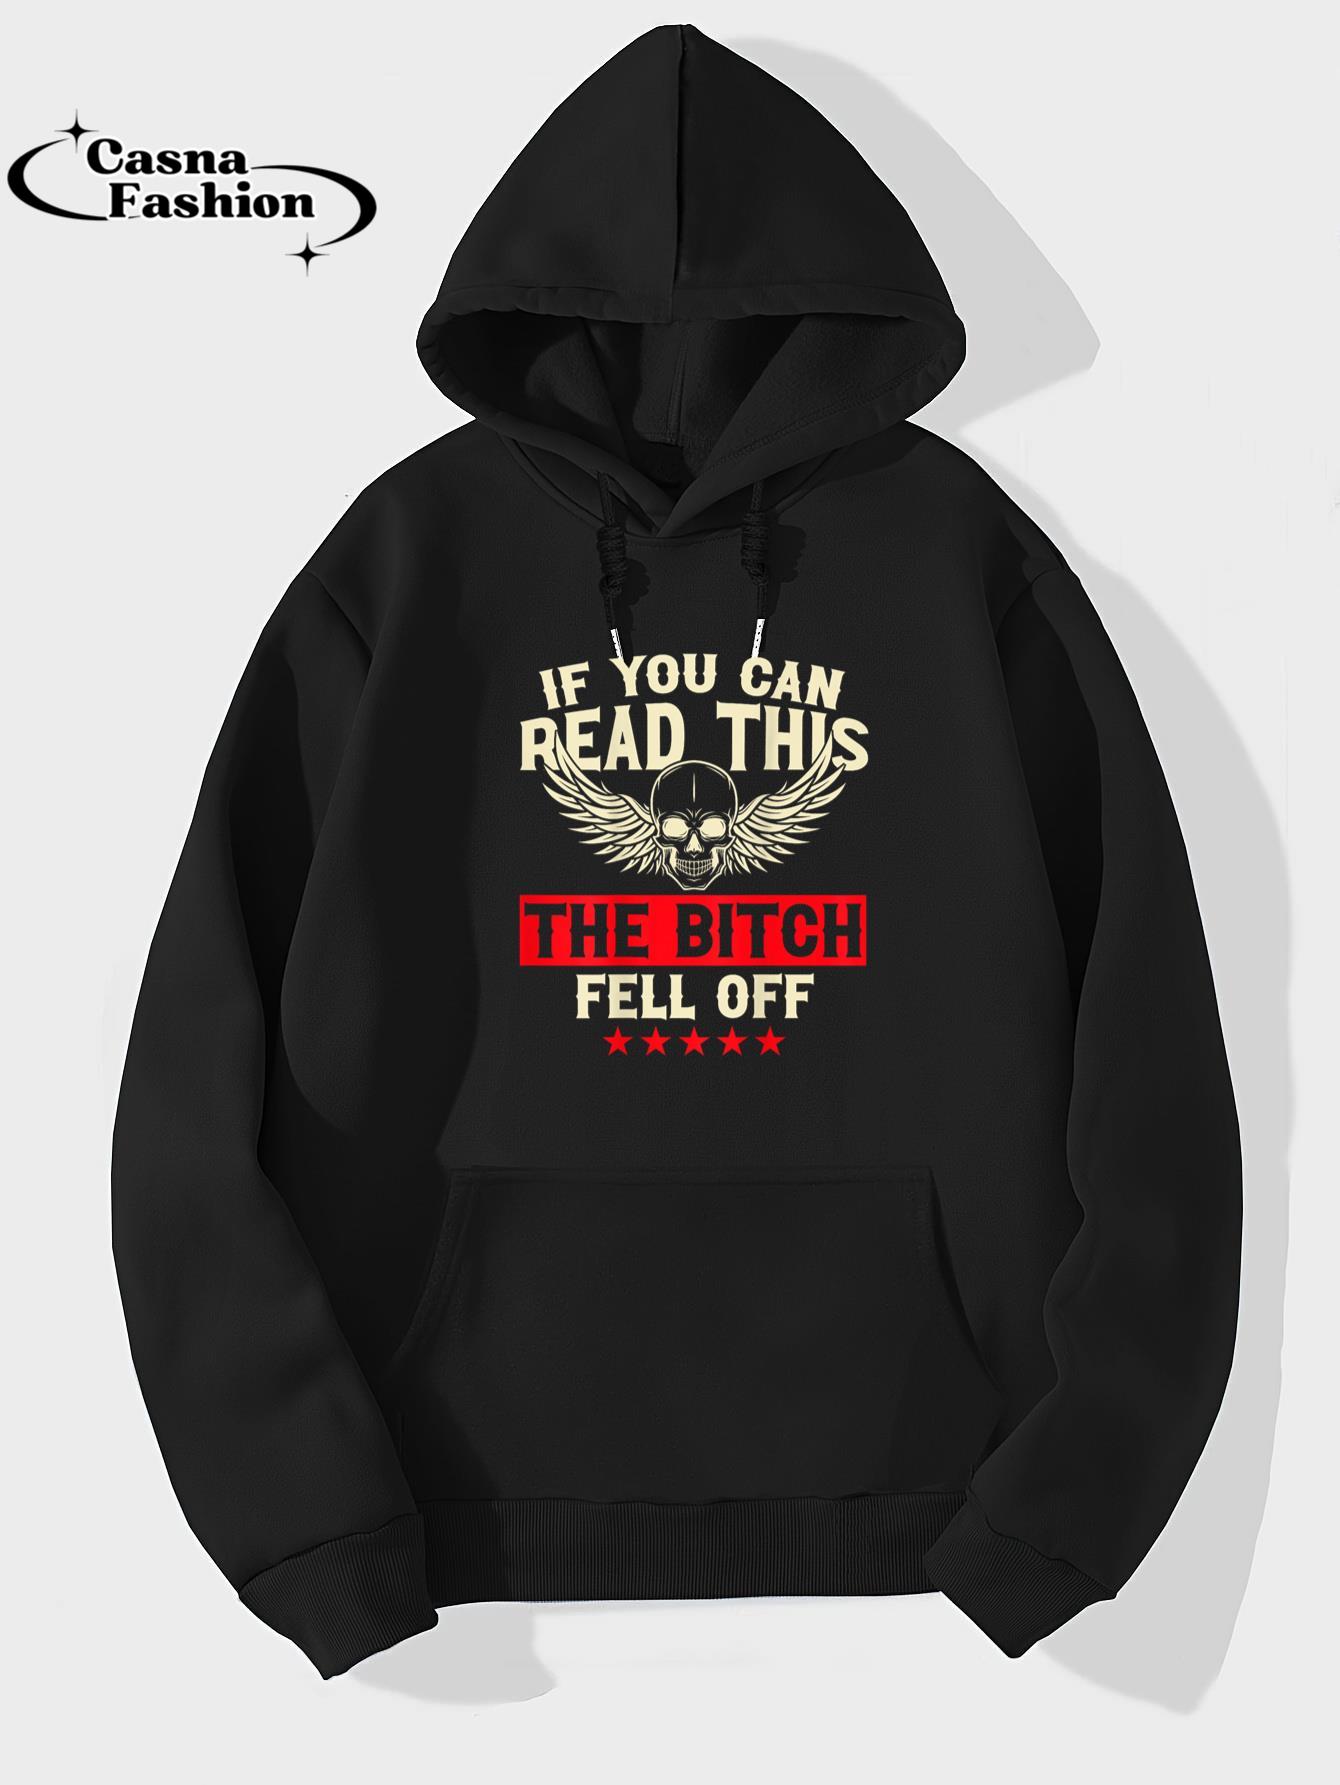 casnafashion_Hoodie_Back Print If You Can Read This The Bitch Fell Off Biker T-Shirt_hoodie_black hoodie